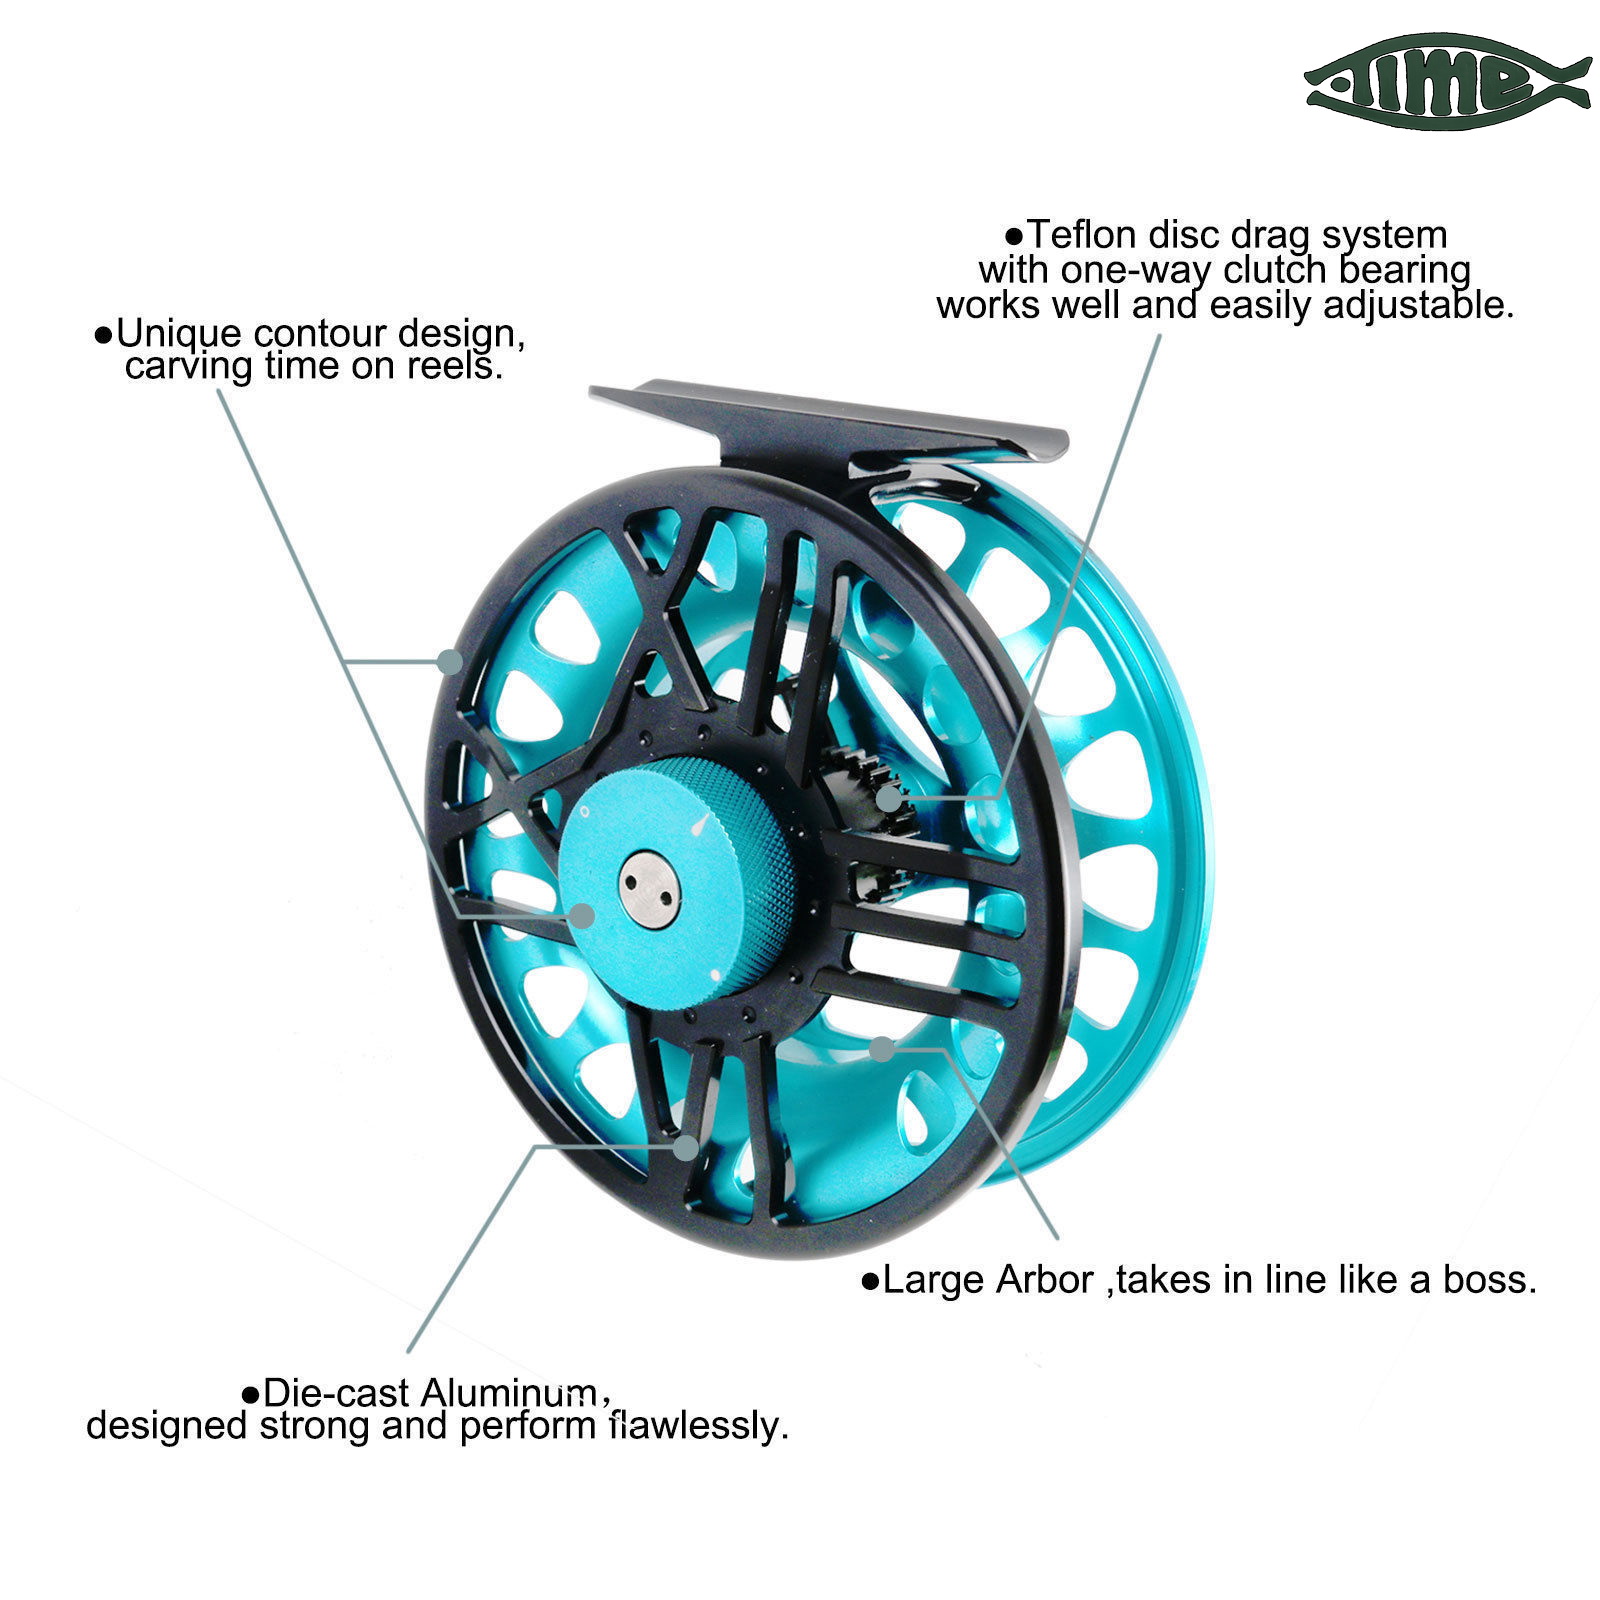  GFRGFH Fly Fishing Reel 5/6 Full Metal Fly Reel Fishing with  CNC Machined Aluminum Alloy Body Silver Aluminum Alloy Bass Trout Fly Reels  : Sports & Outdoors